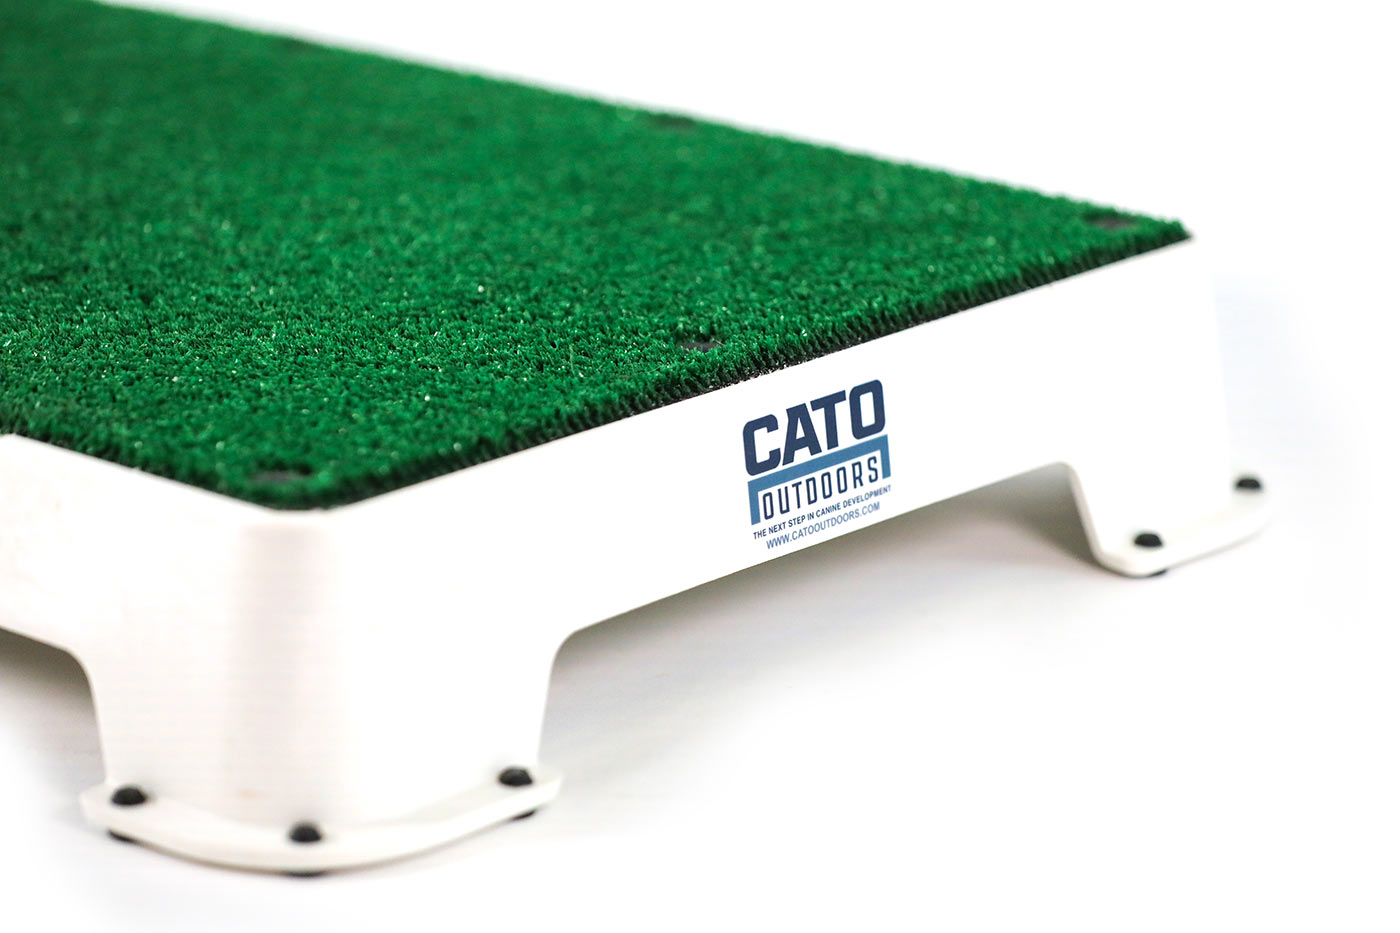 The Cato Place Board Will MAKE Your Training EASIER! 